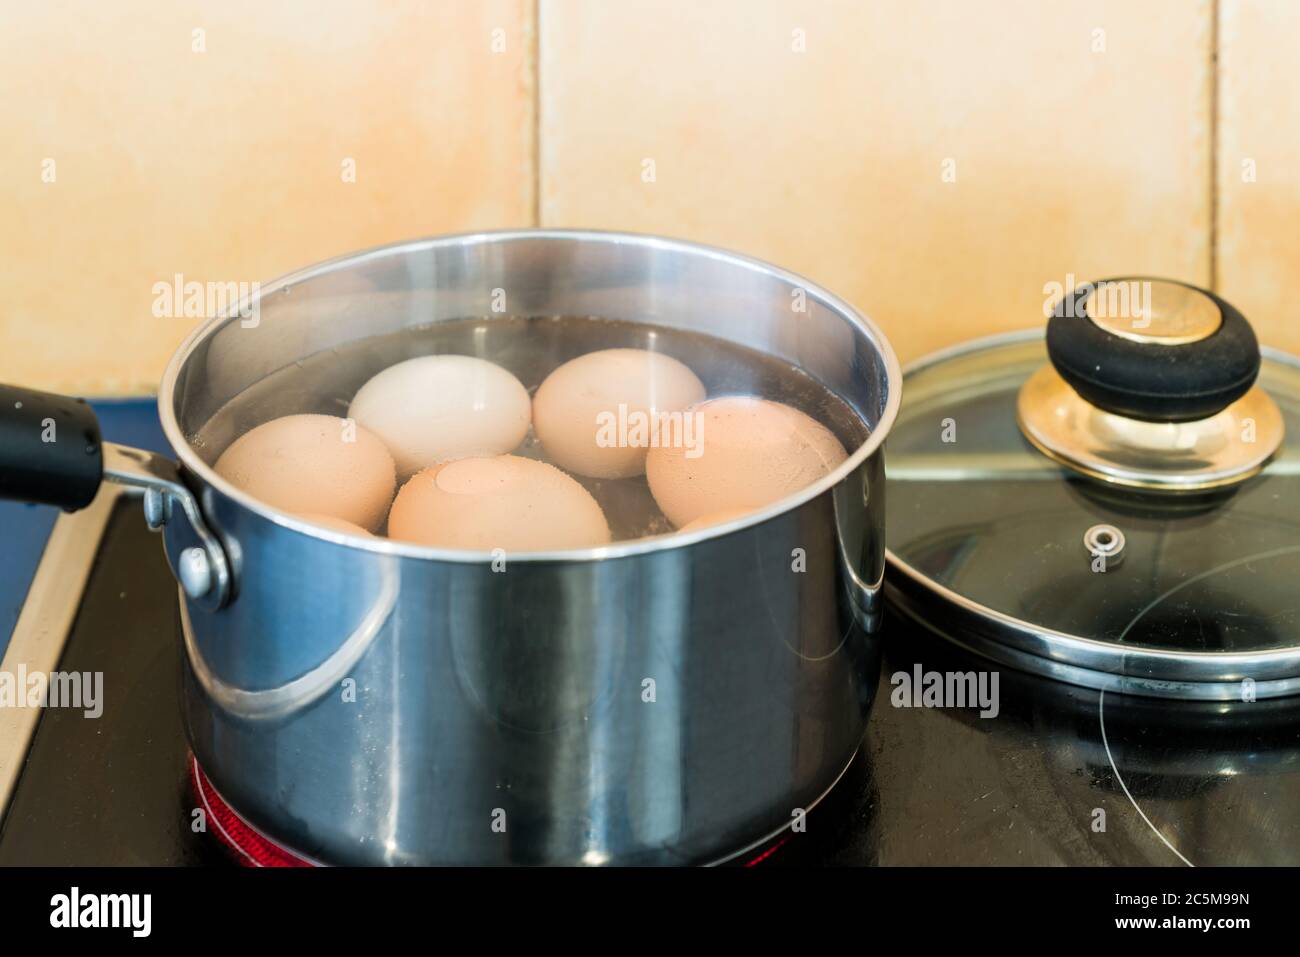 Eggs boiling in stainless steel saucepan on cook top in home kitchen Stock Photo